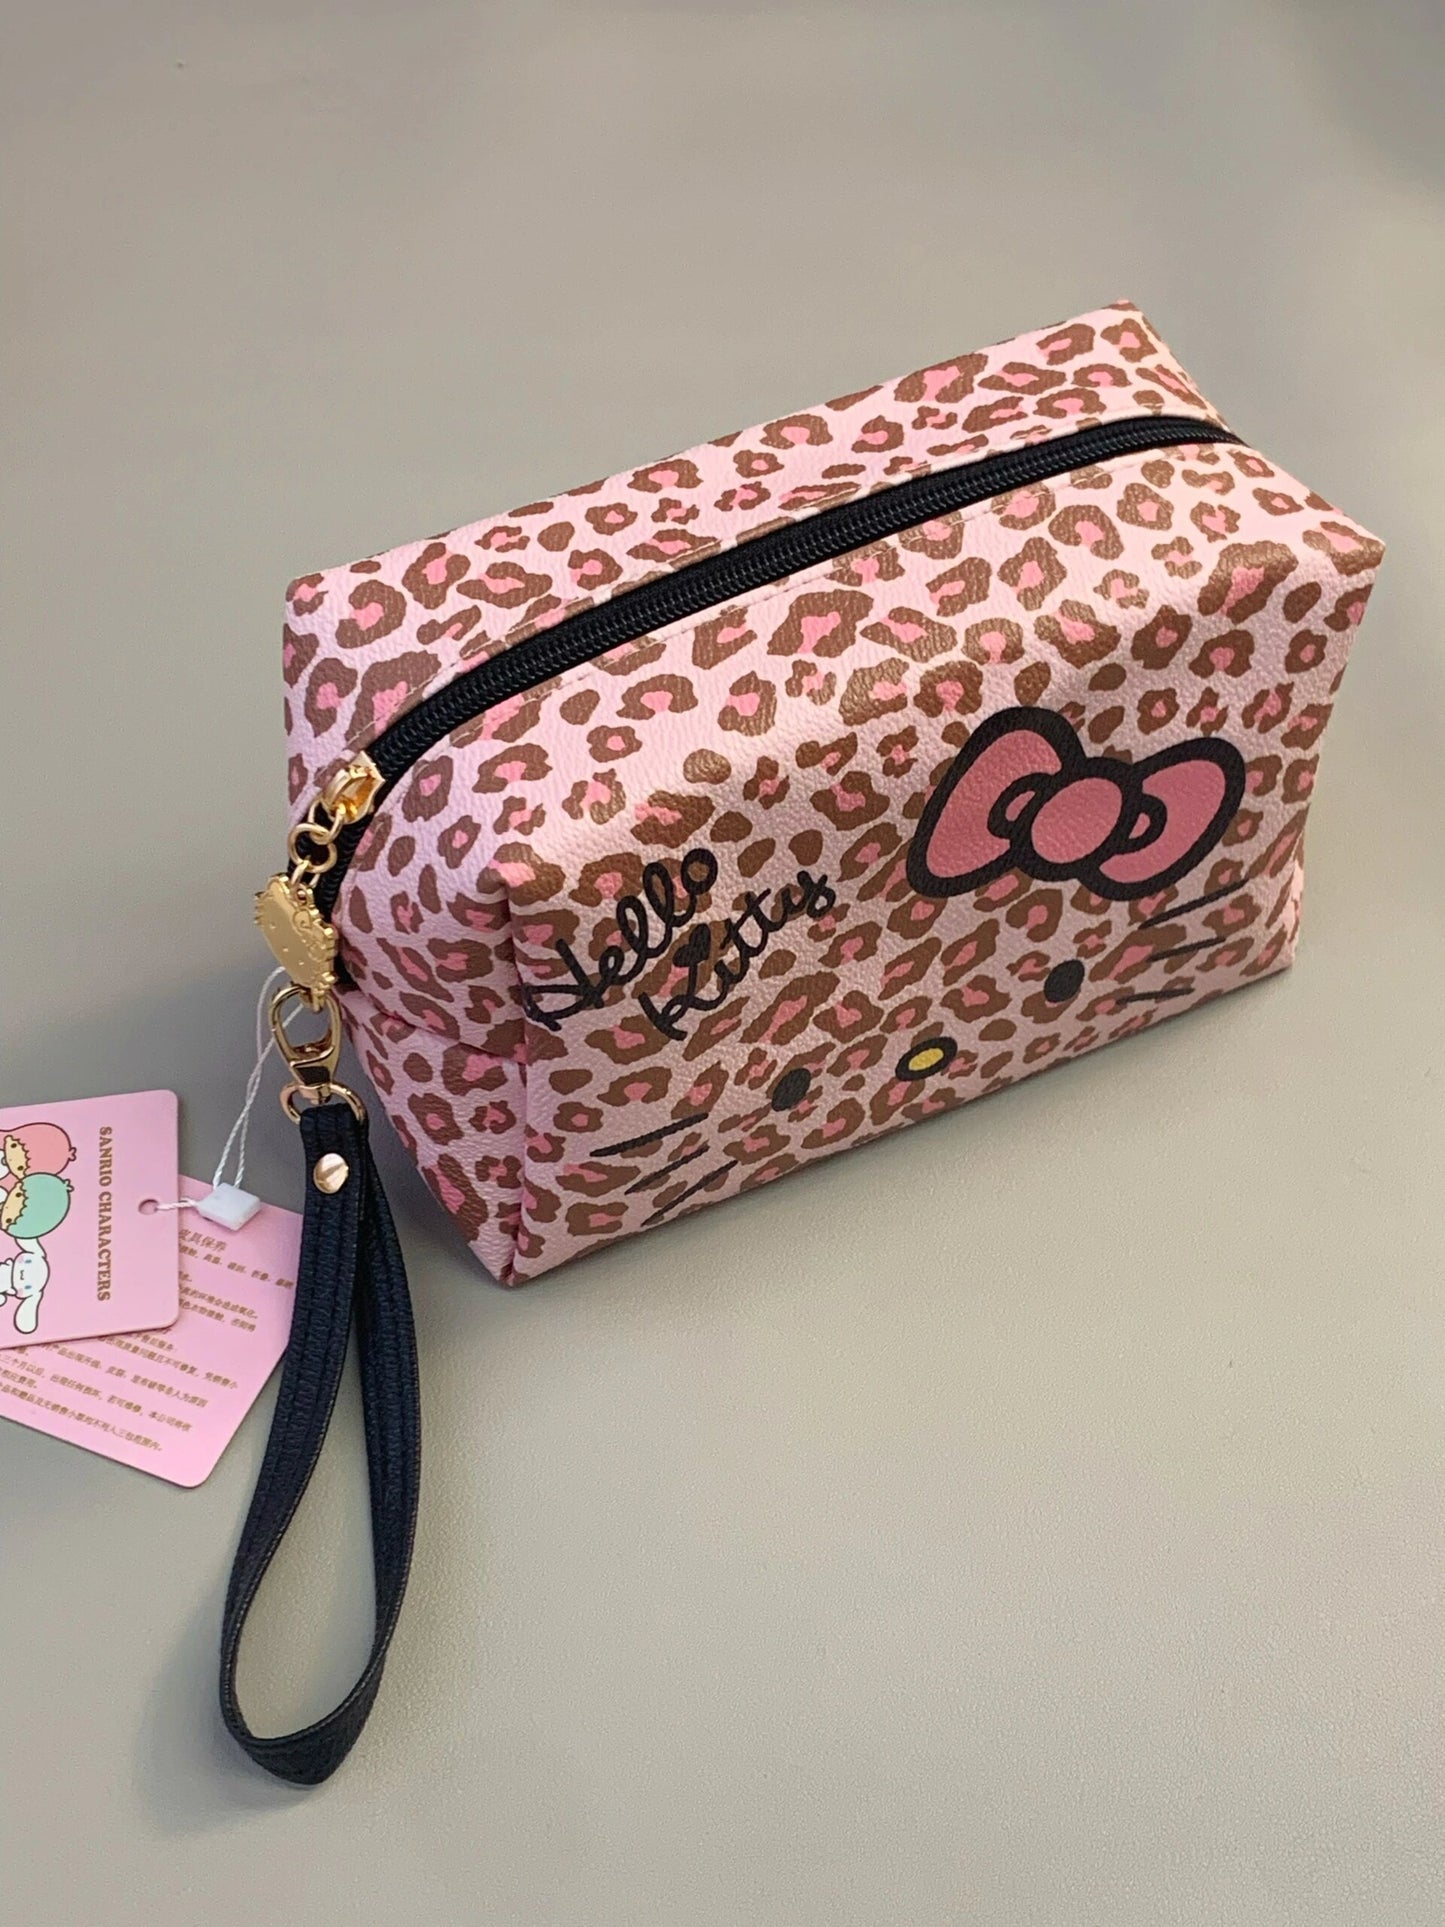 Hellokitty Leopard-print Travel Makeup Portable Storage Bag | Dividers for Cosmetics Makeup Brushes Toiletry Jewelry Digital Accessories